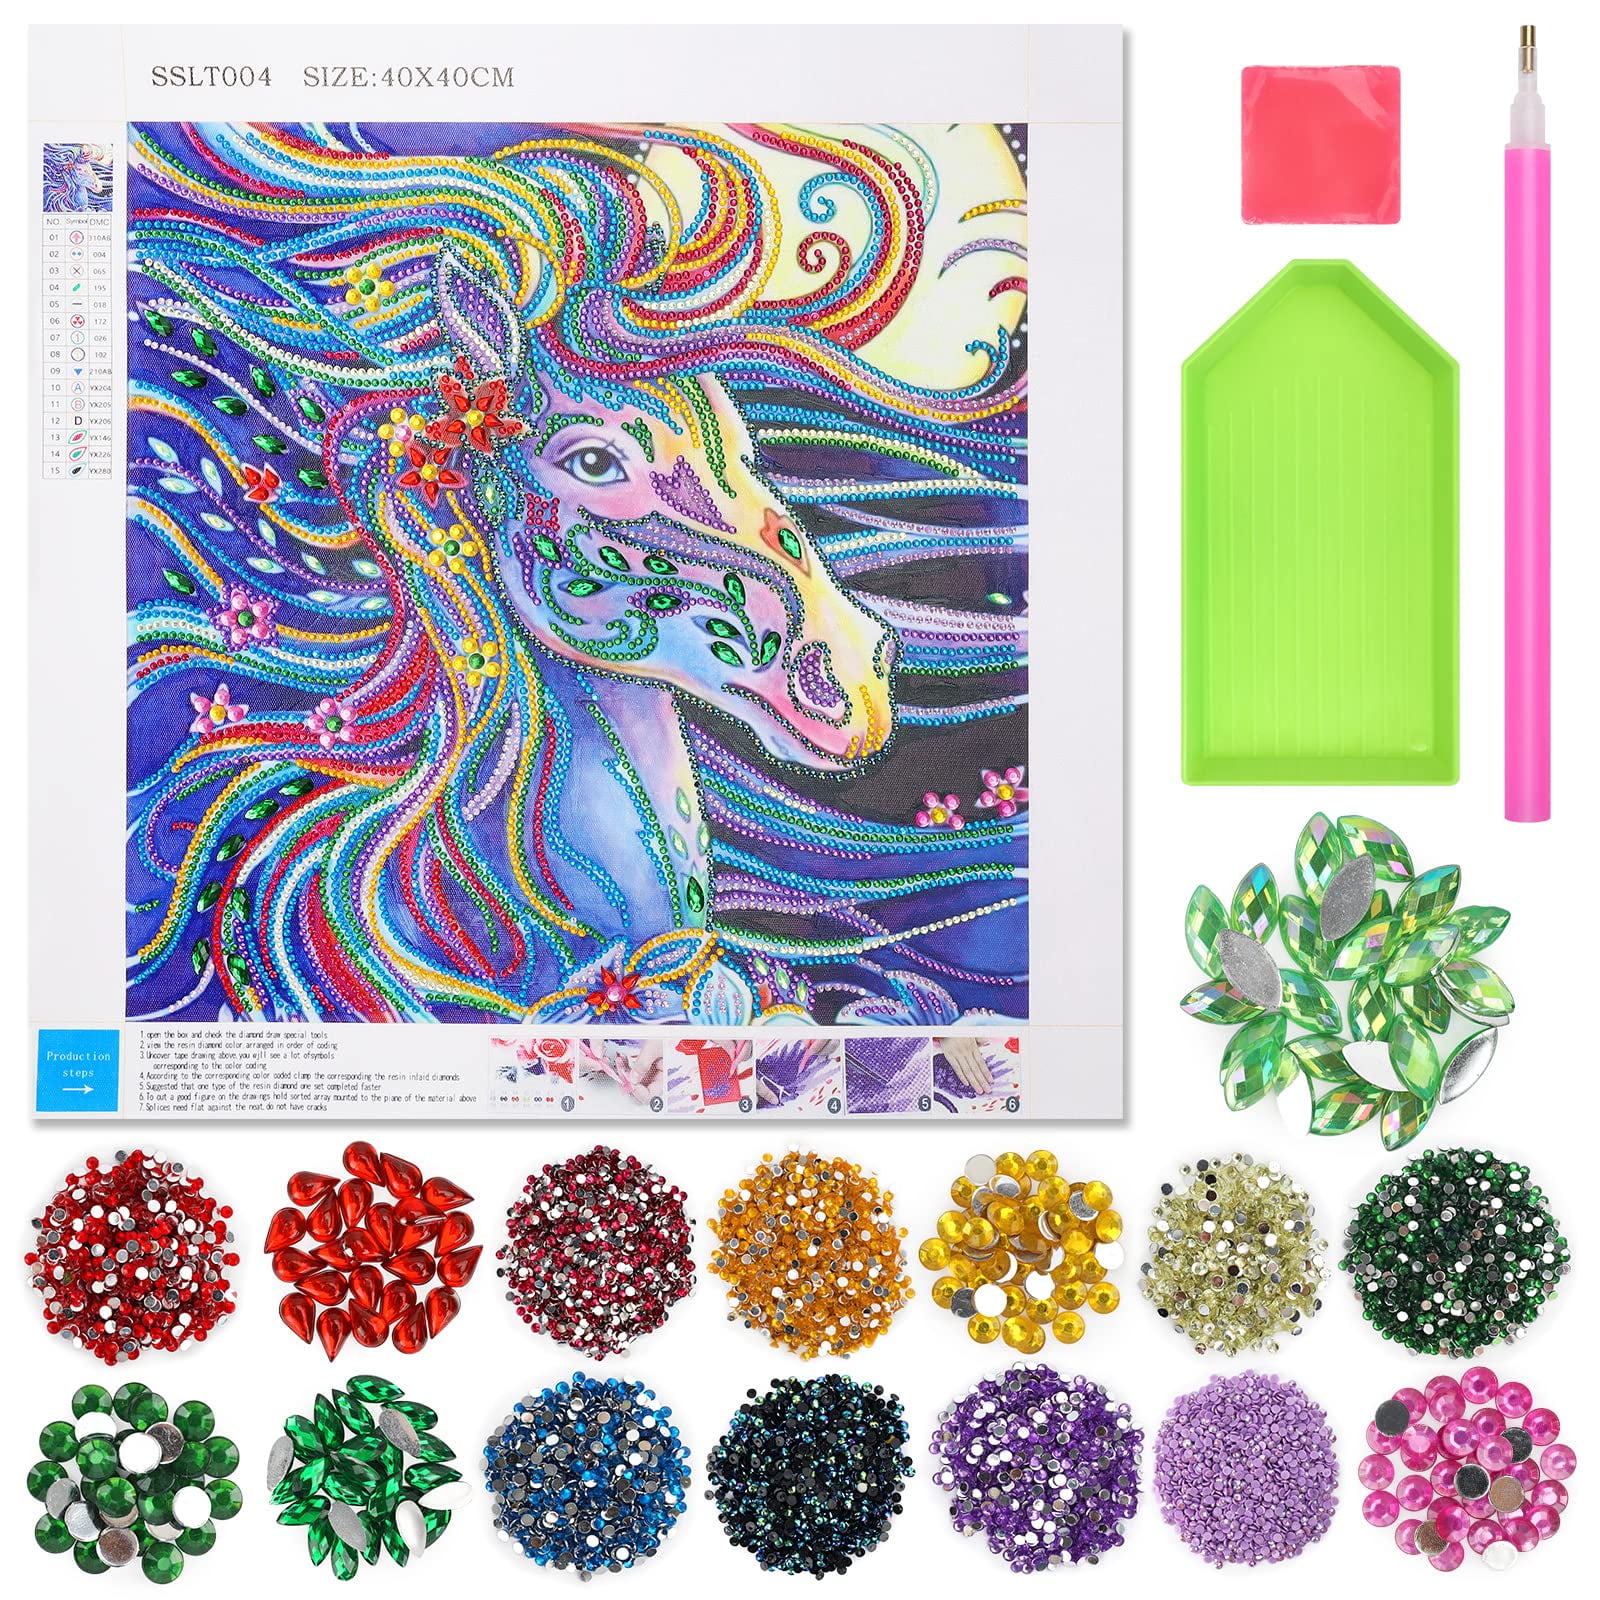 Arts and Crafts Gifts for 10 11 12 13+ Year Old Girls Kids, DIY 5D Painting for Girls Adults Teenage Kids Age 8 9 11 12 Diamond Art Kits Birthday